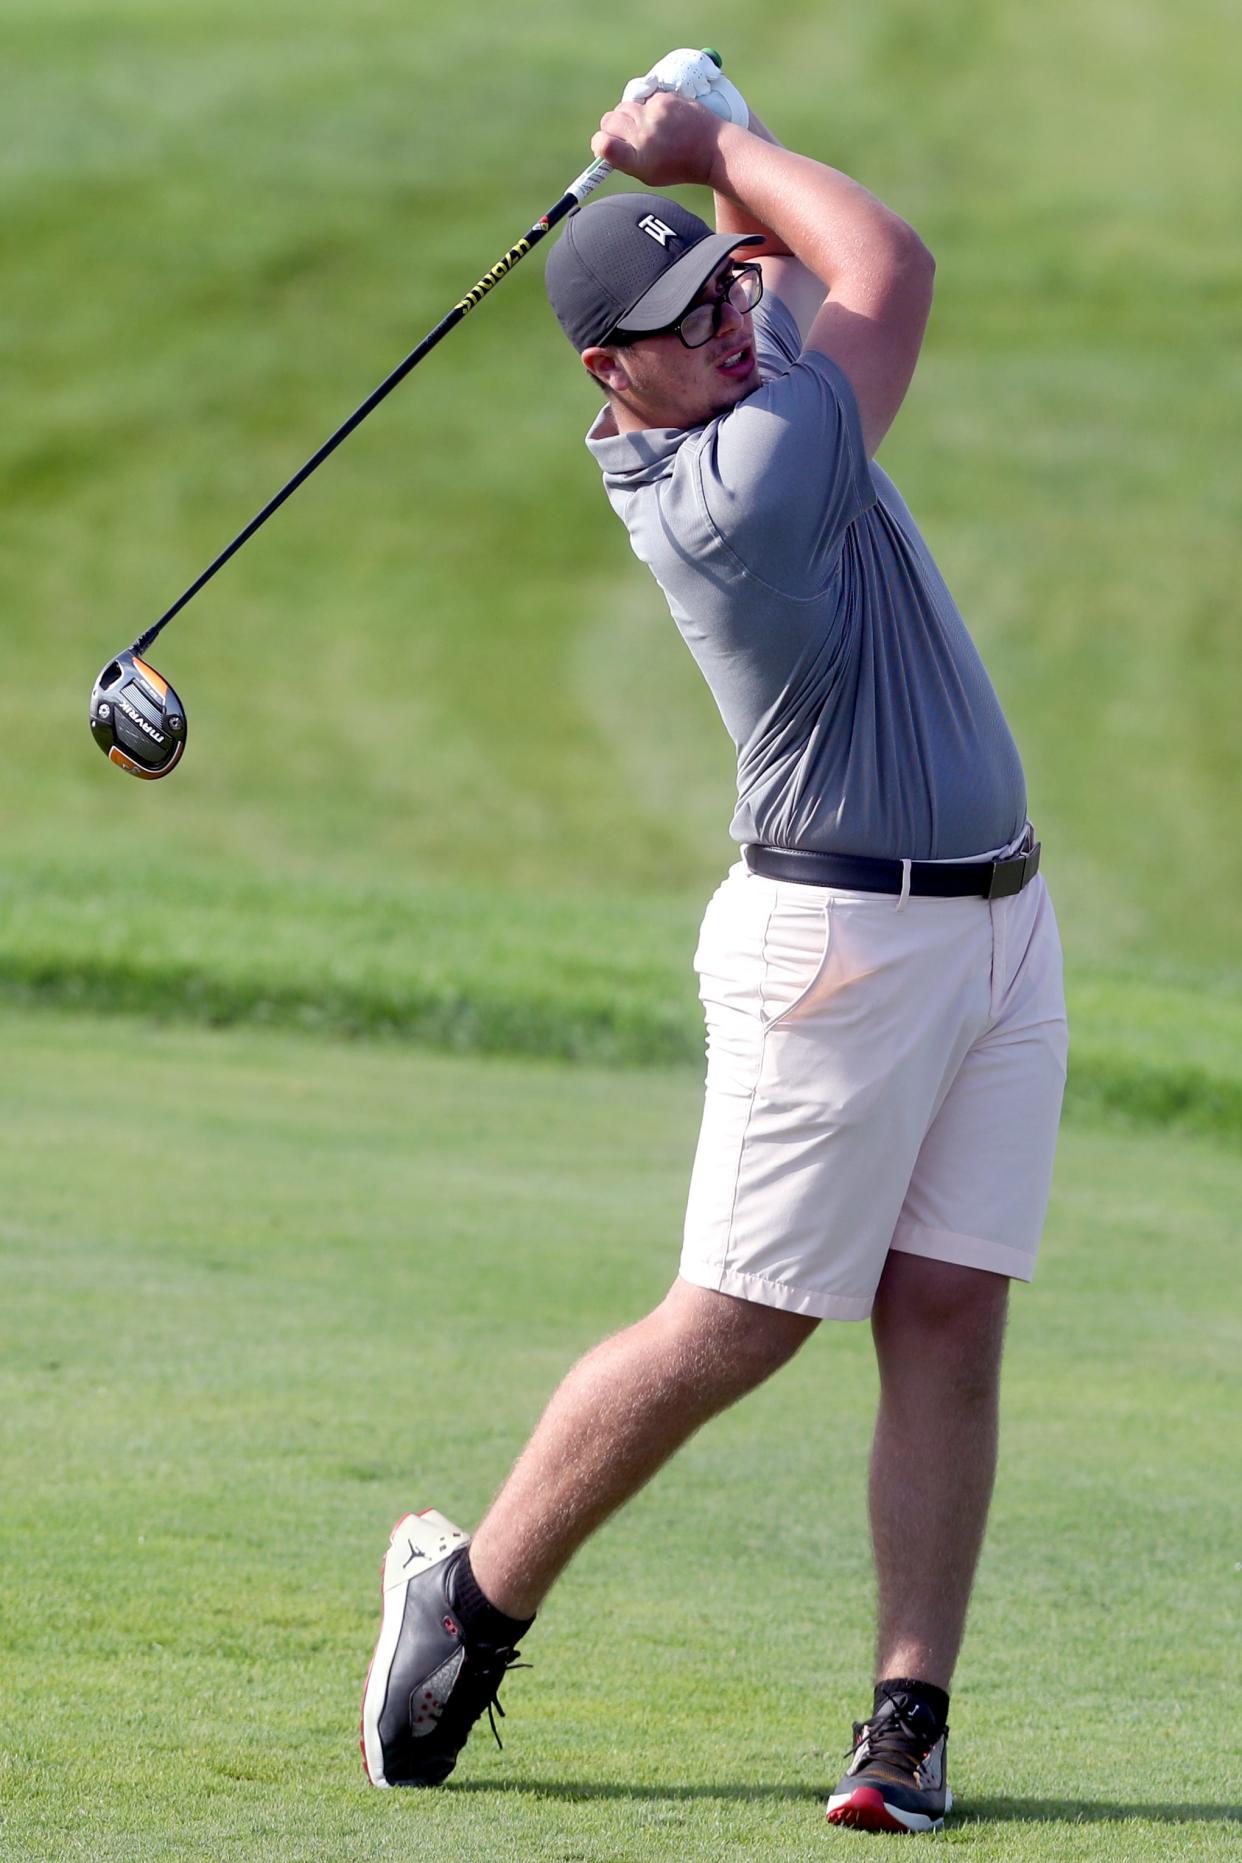 Sandy Valley golfer Connor Ritter will appear in his fourth straight Division II state tournament this year. He is the defending state champion.